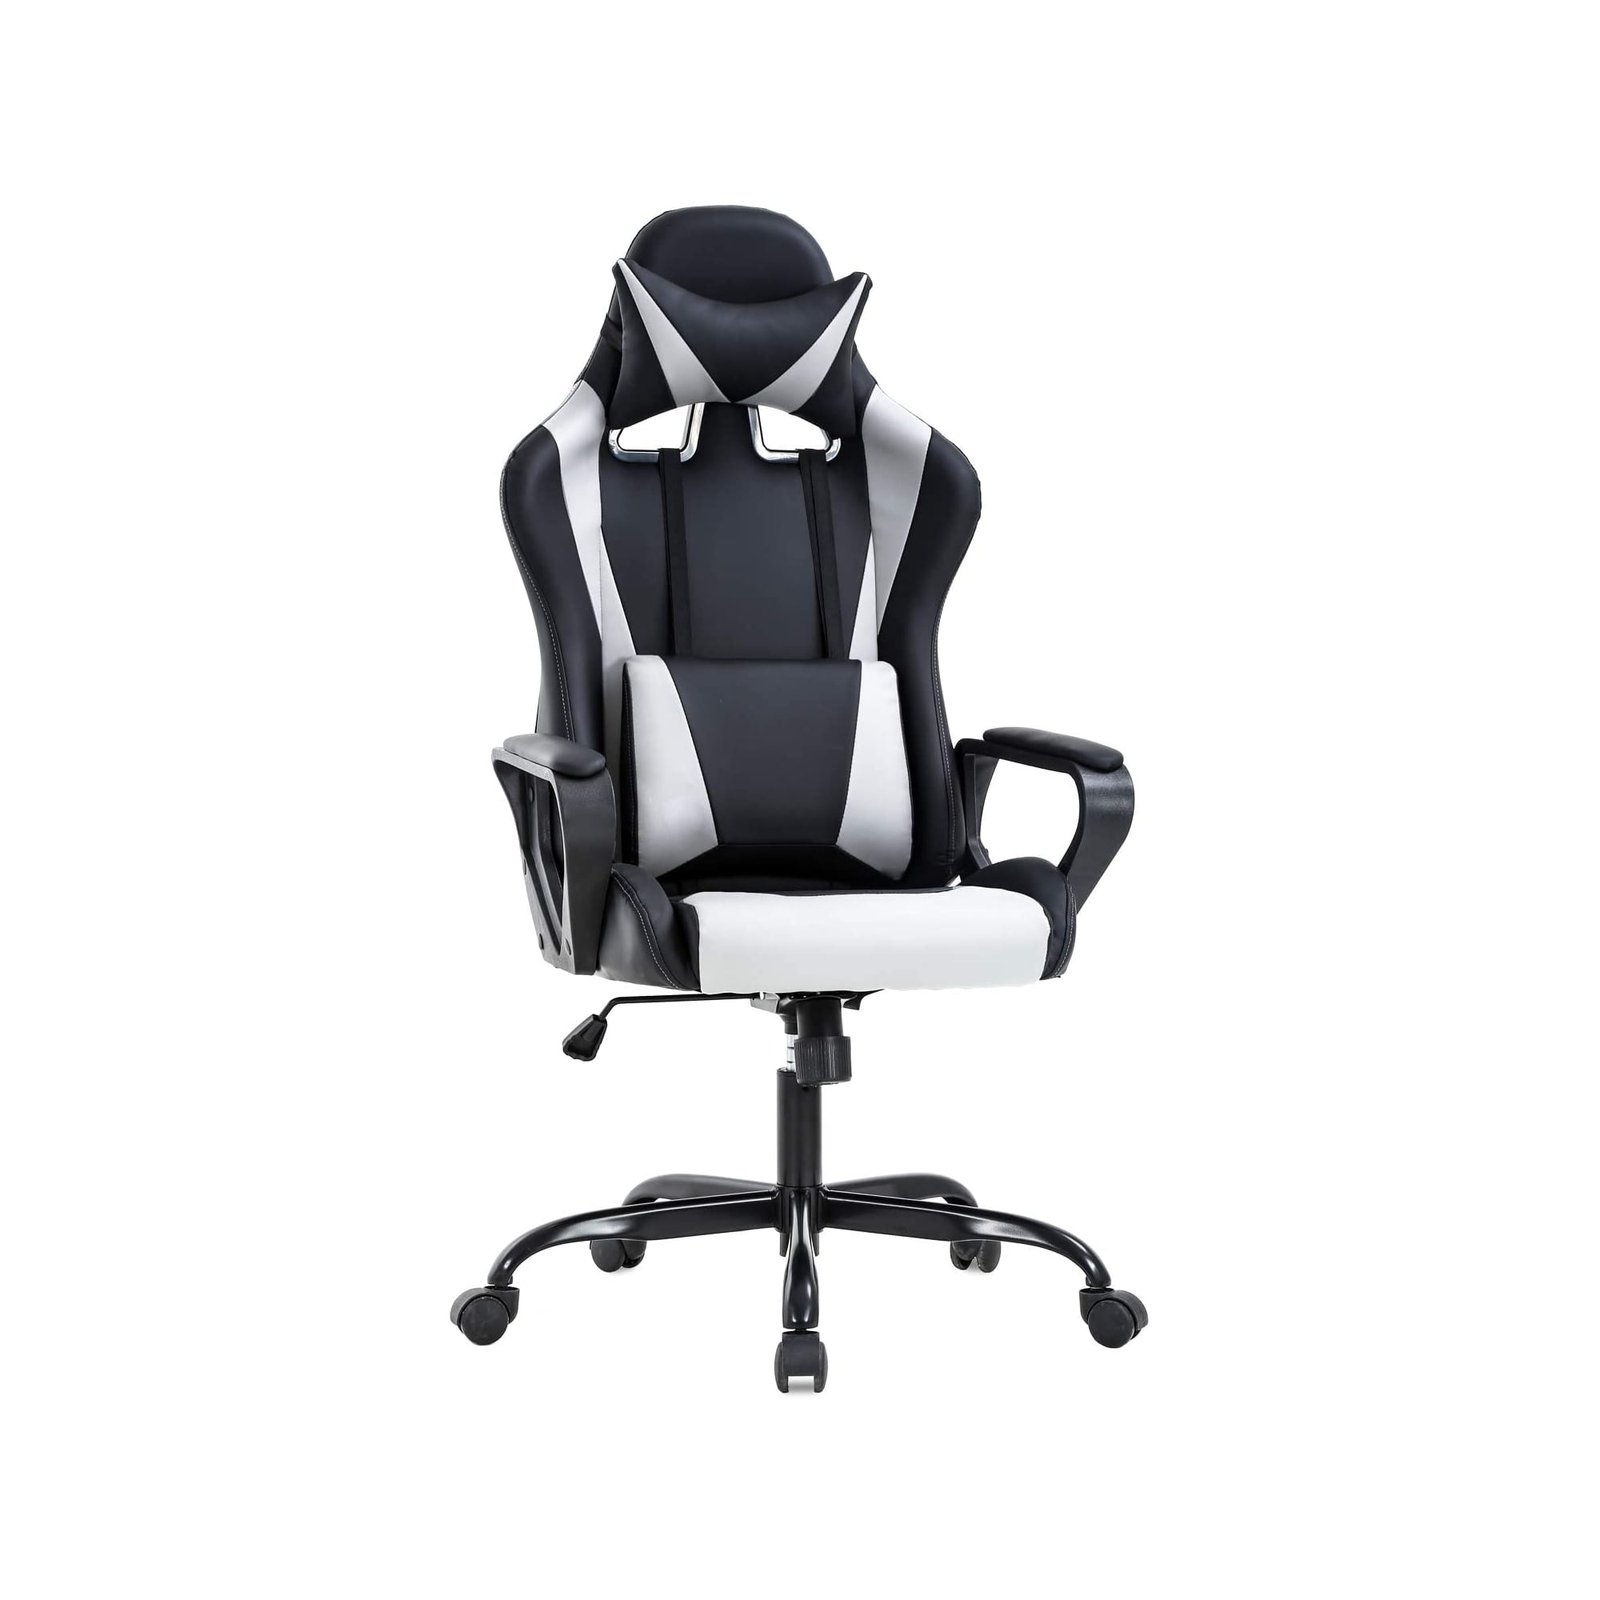 https://themarketdepot.com/wp-content/uploads/2023/01/High-Back-Gaming-Chair-PC-Office-Chair-Computer-Racing-Chair-PU-Desk-Task-Chair-Ergonomic-Executive-Swivel-Rolling-Chair-with-Lumbar-Support-for-Back-Pain-Women-Men-WHITE-1.jpeg